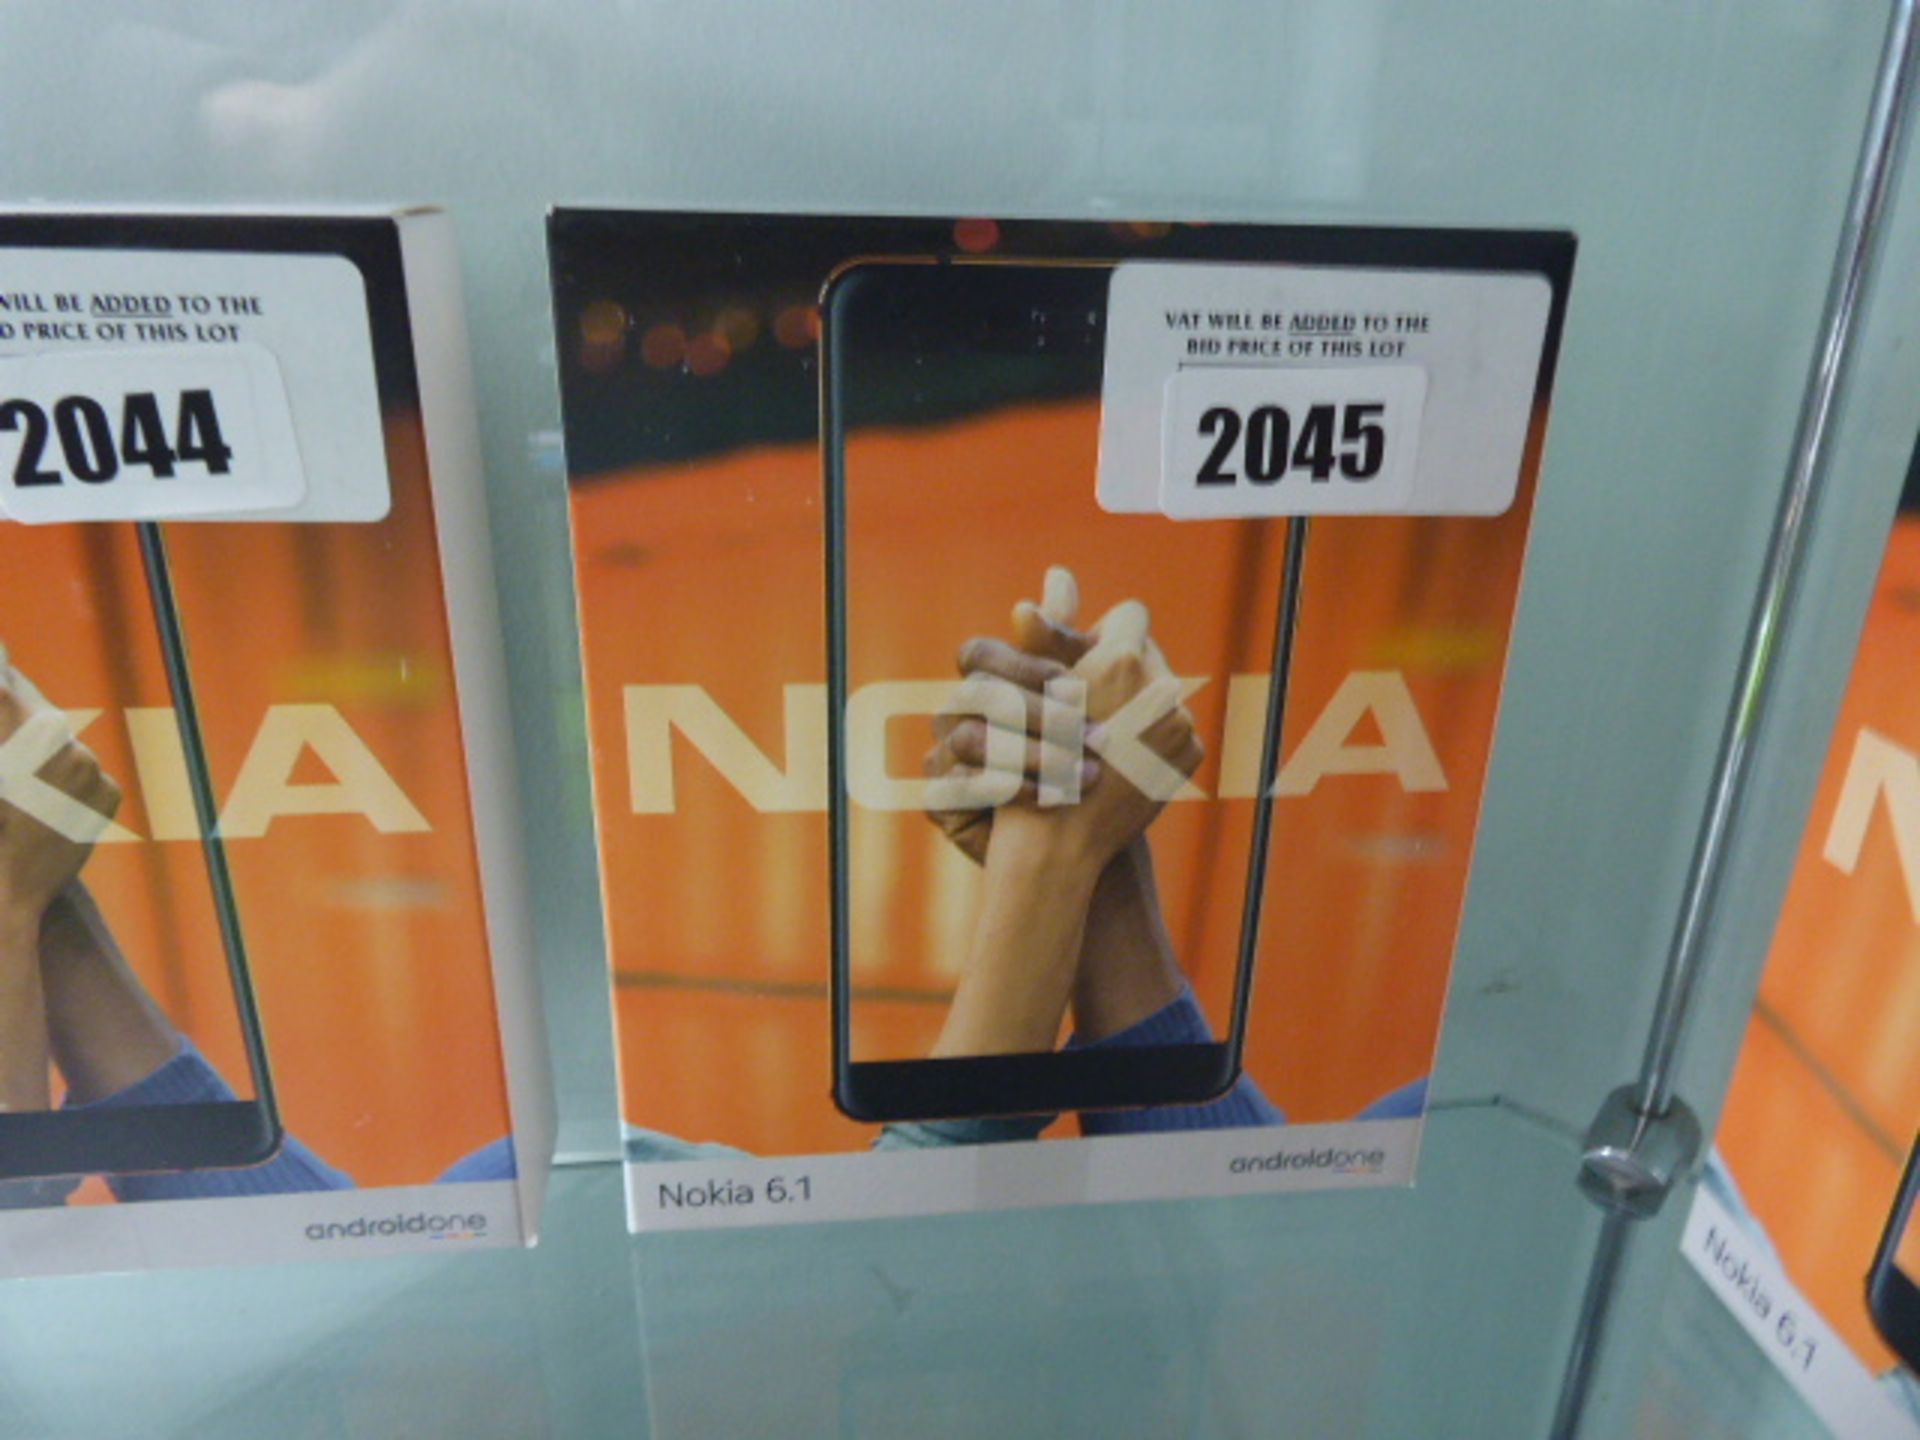 A Nokia 6.1 Android 1 mobile phone in box